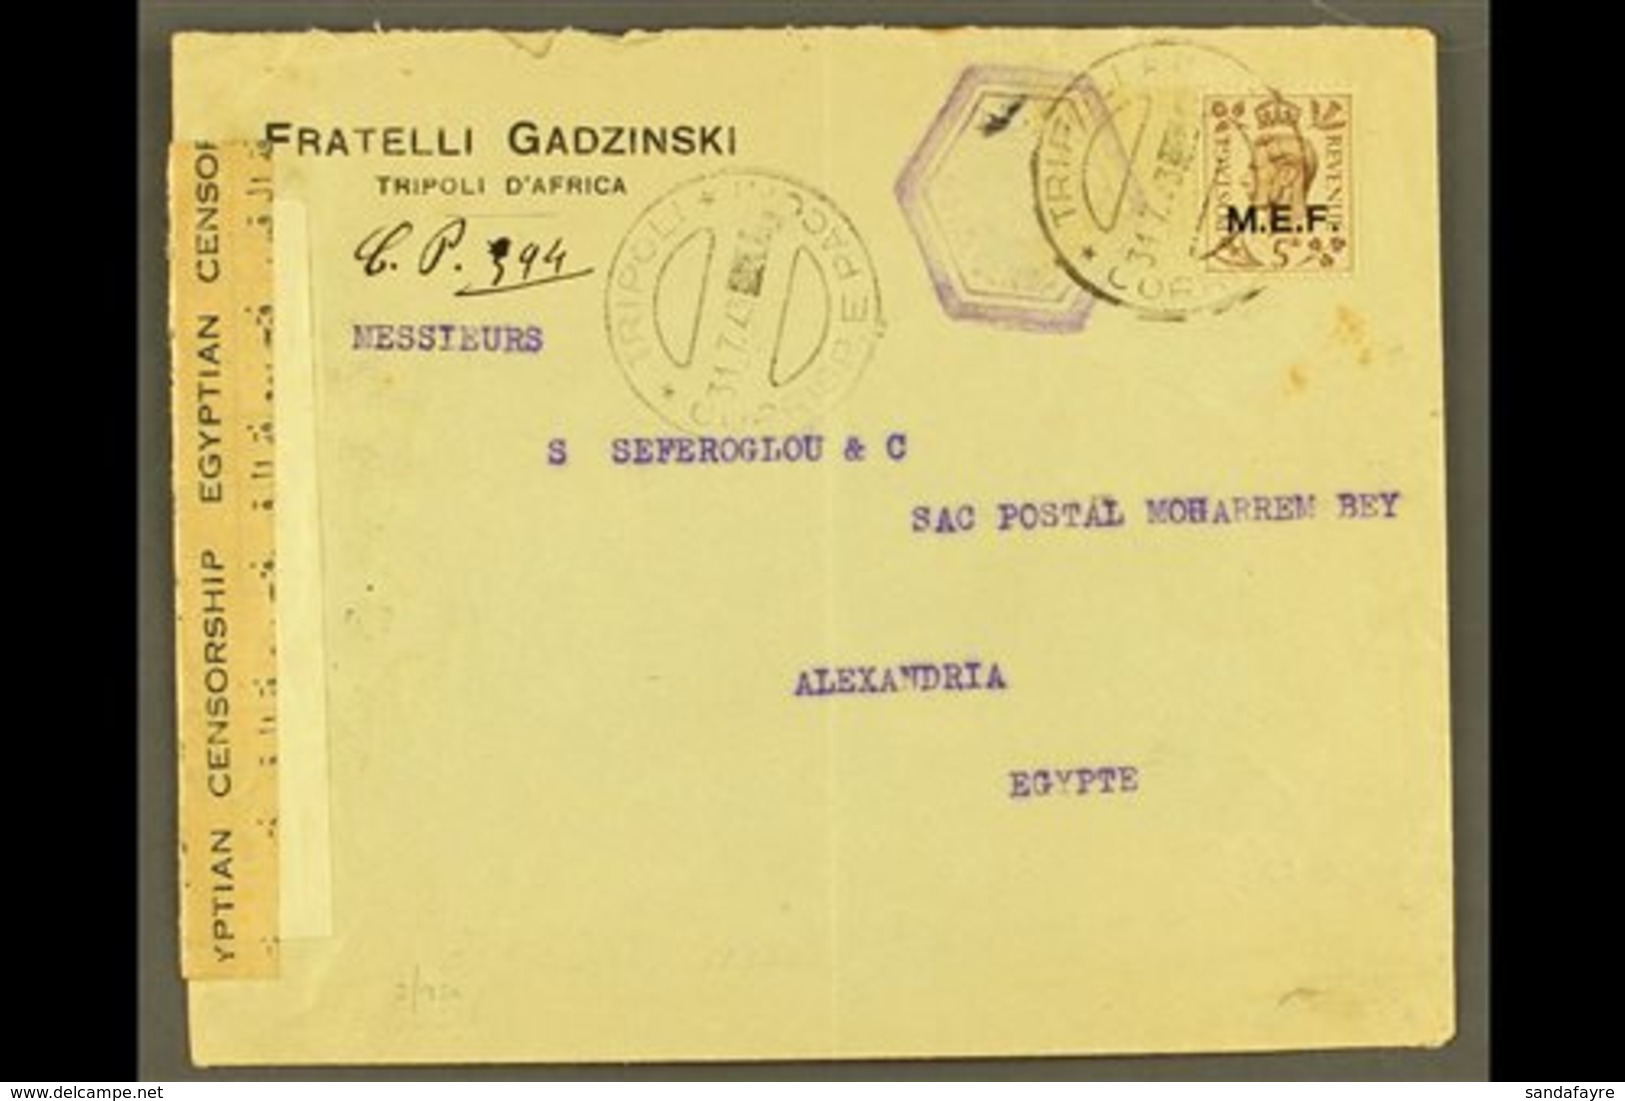 TRIPOLI  1943 Censored Commercial Cover To Egypt, Franked With KGVI 5d "M.E.F." Ovpt, Clear Tripoli 31.7.43 C.d.s. Postm - Italiaans Oost-Afrika